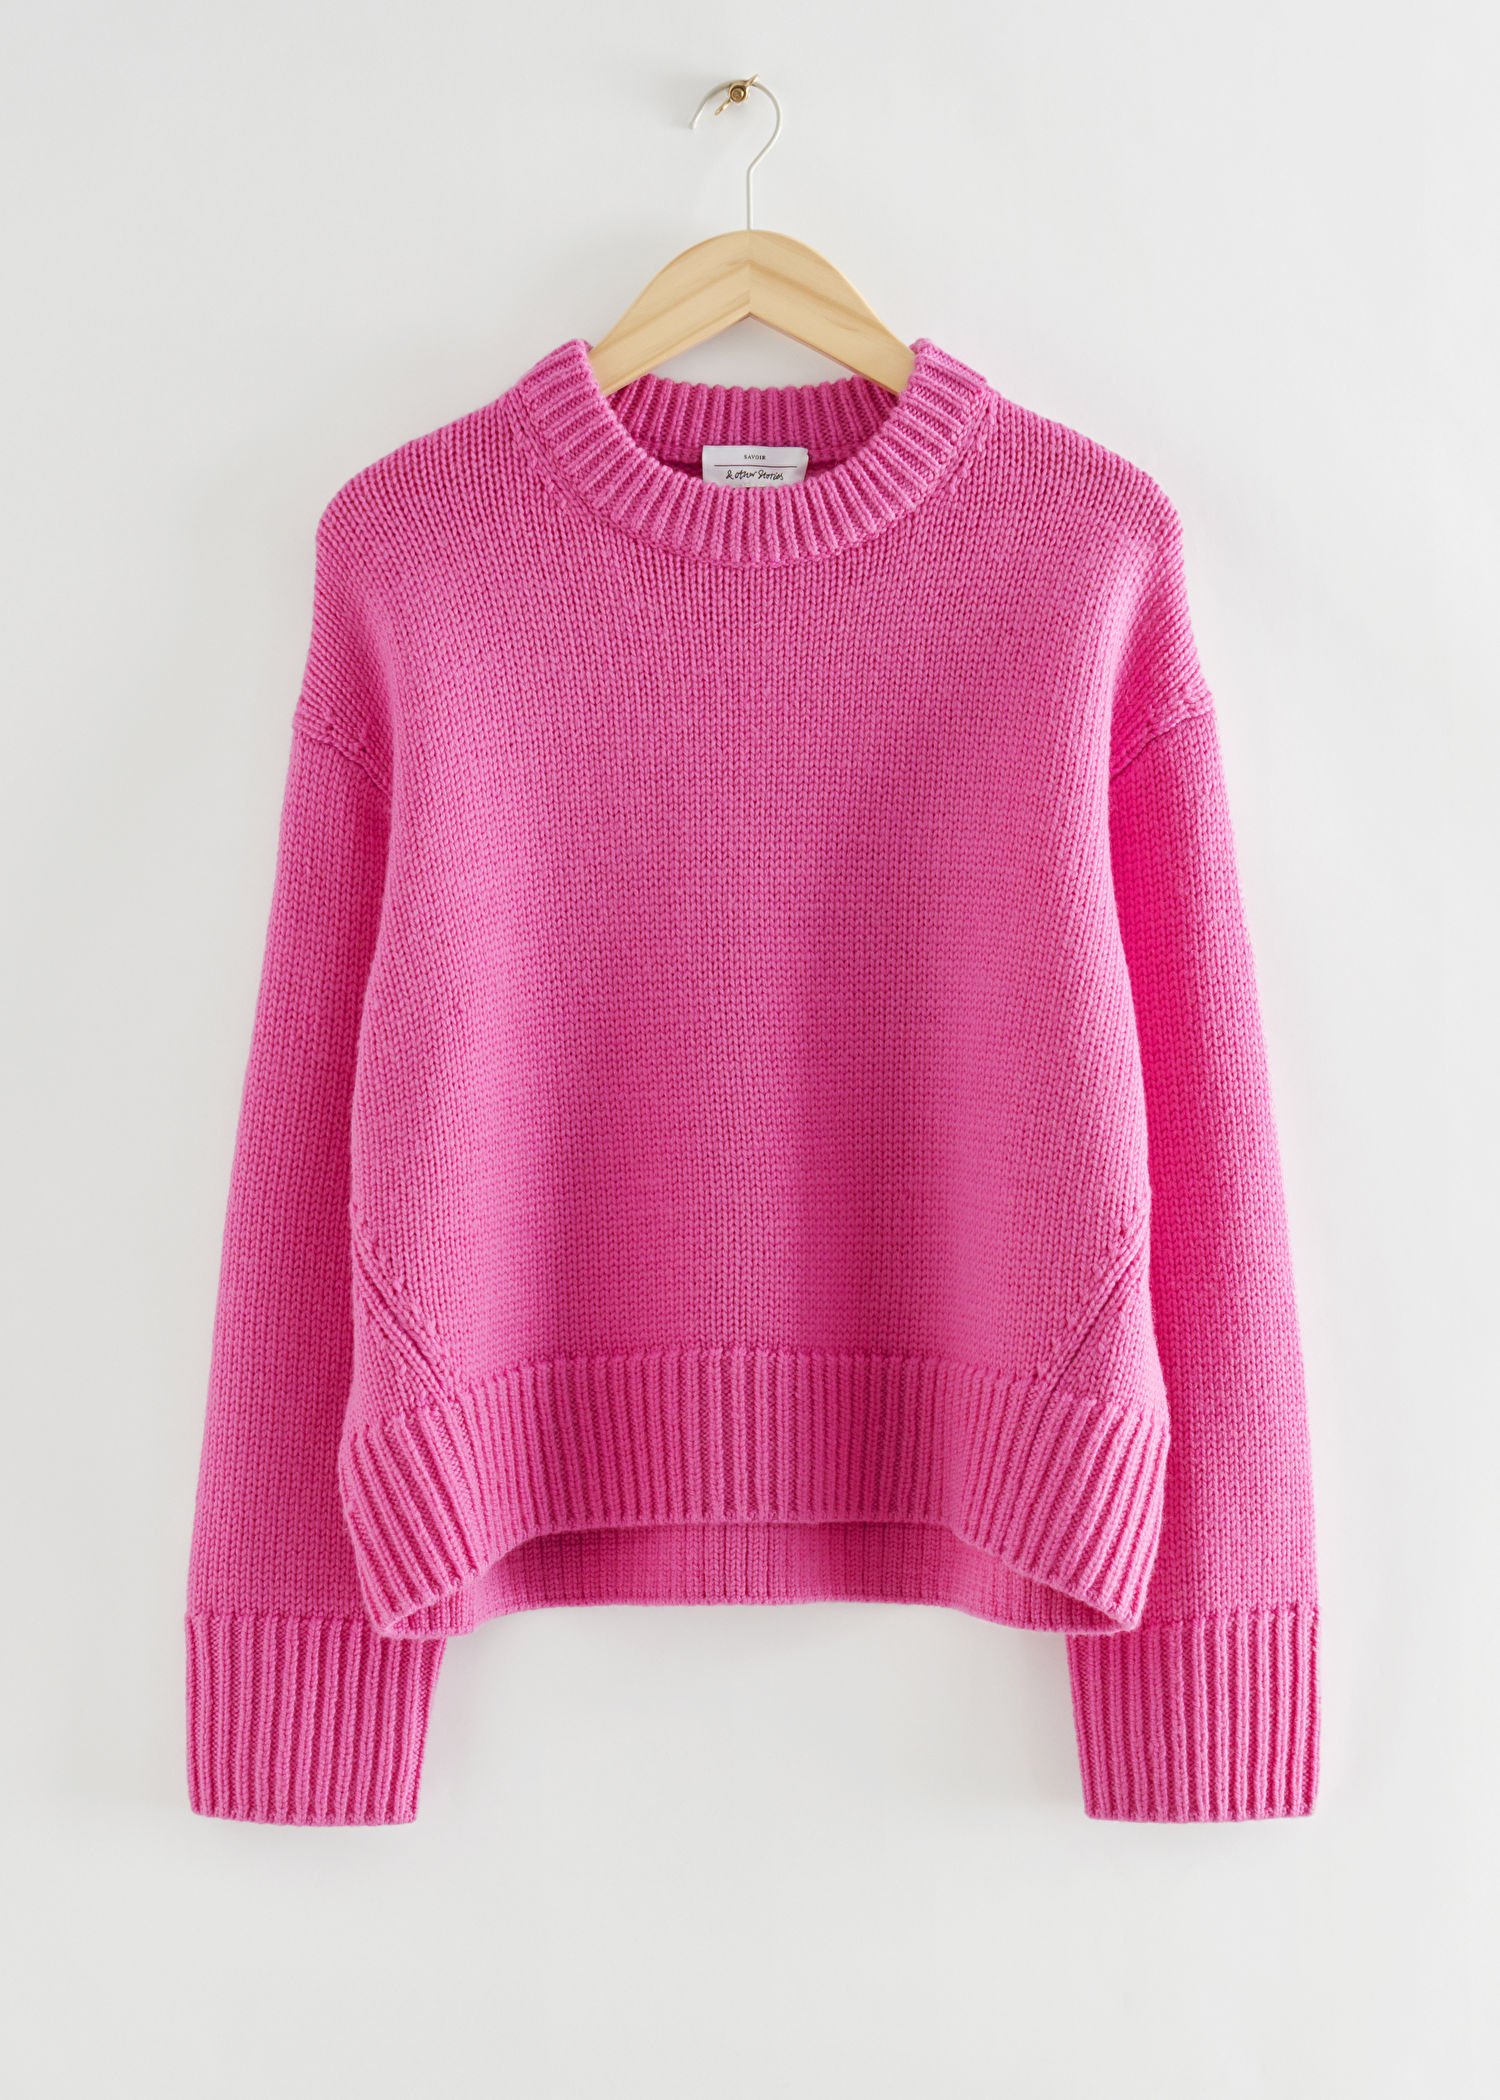 & OTHER STORIES Oversized Cocoon-Shaped Jumper in Bright Pink | Endource